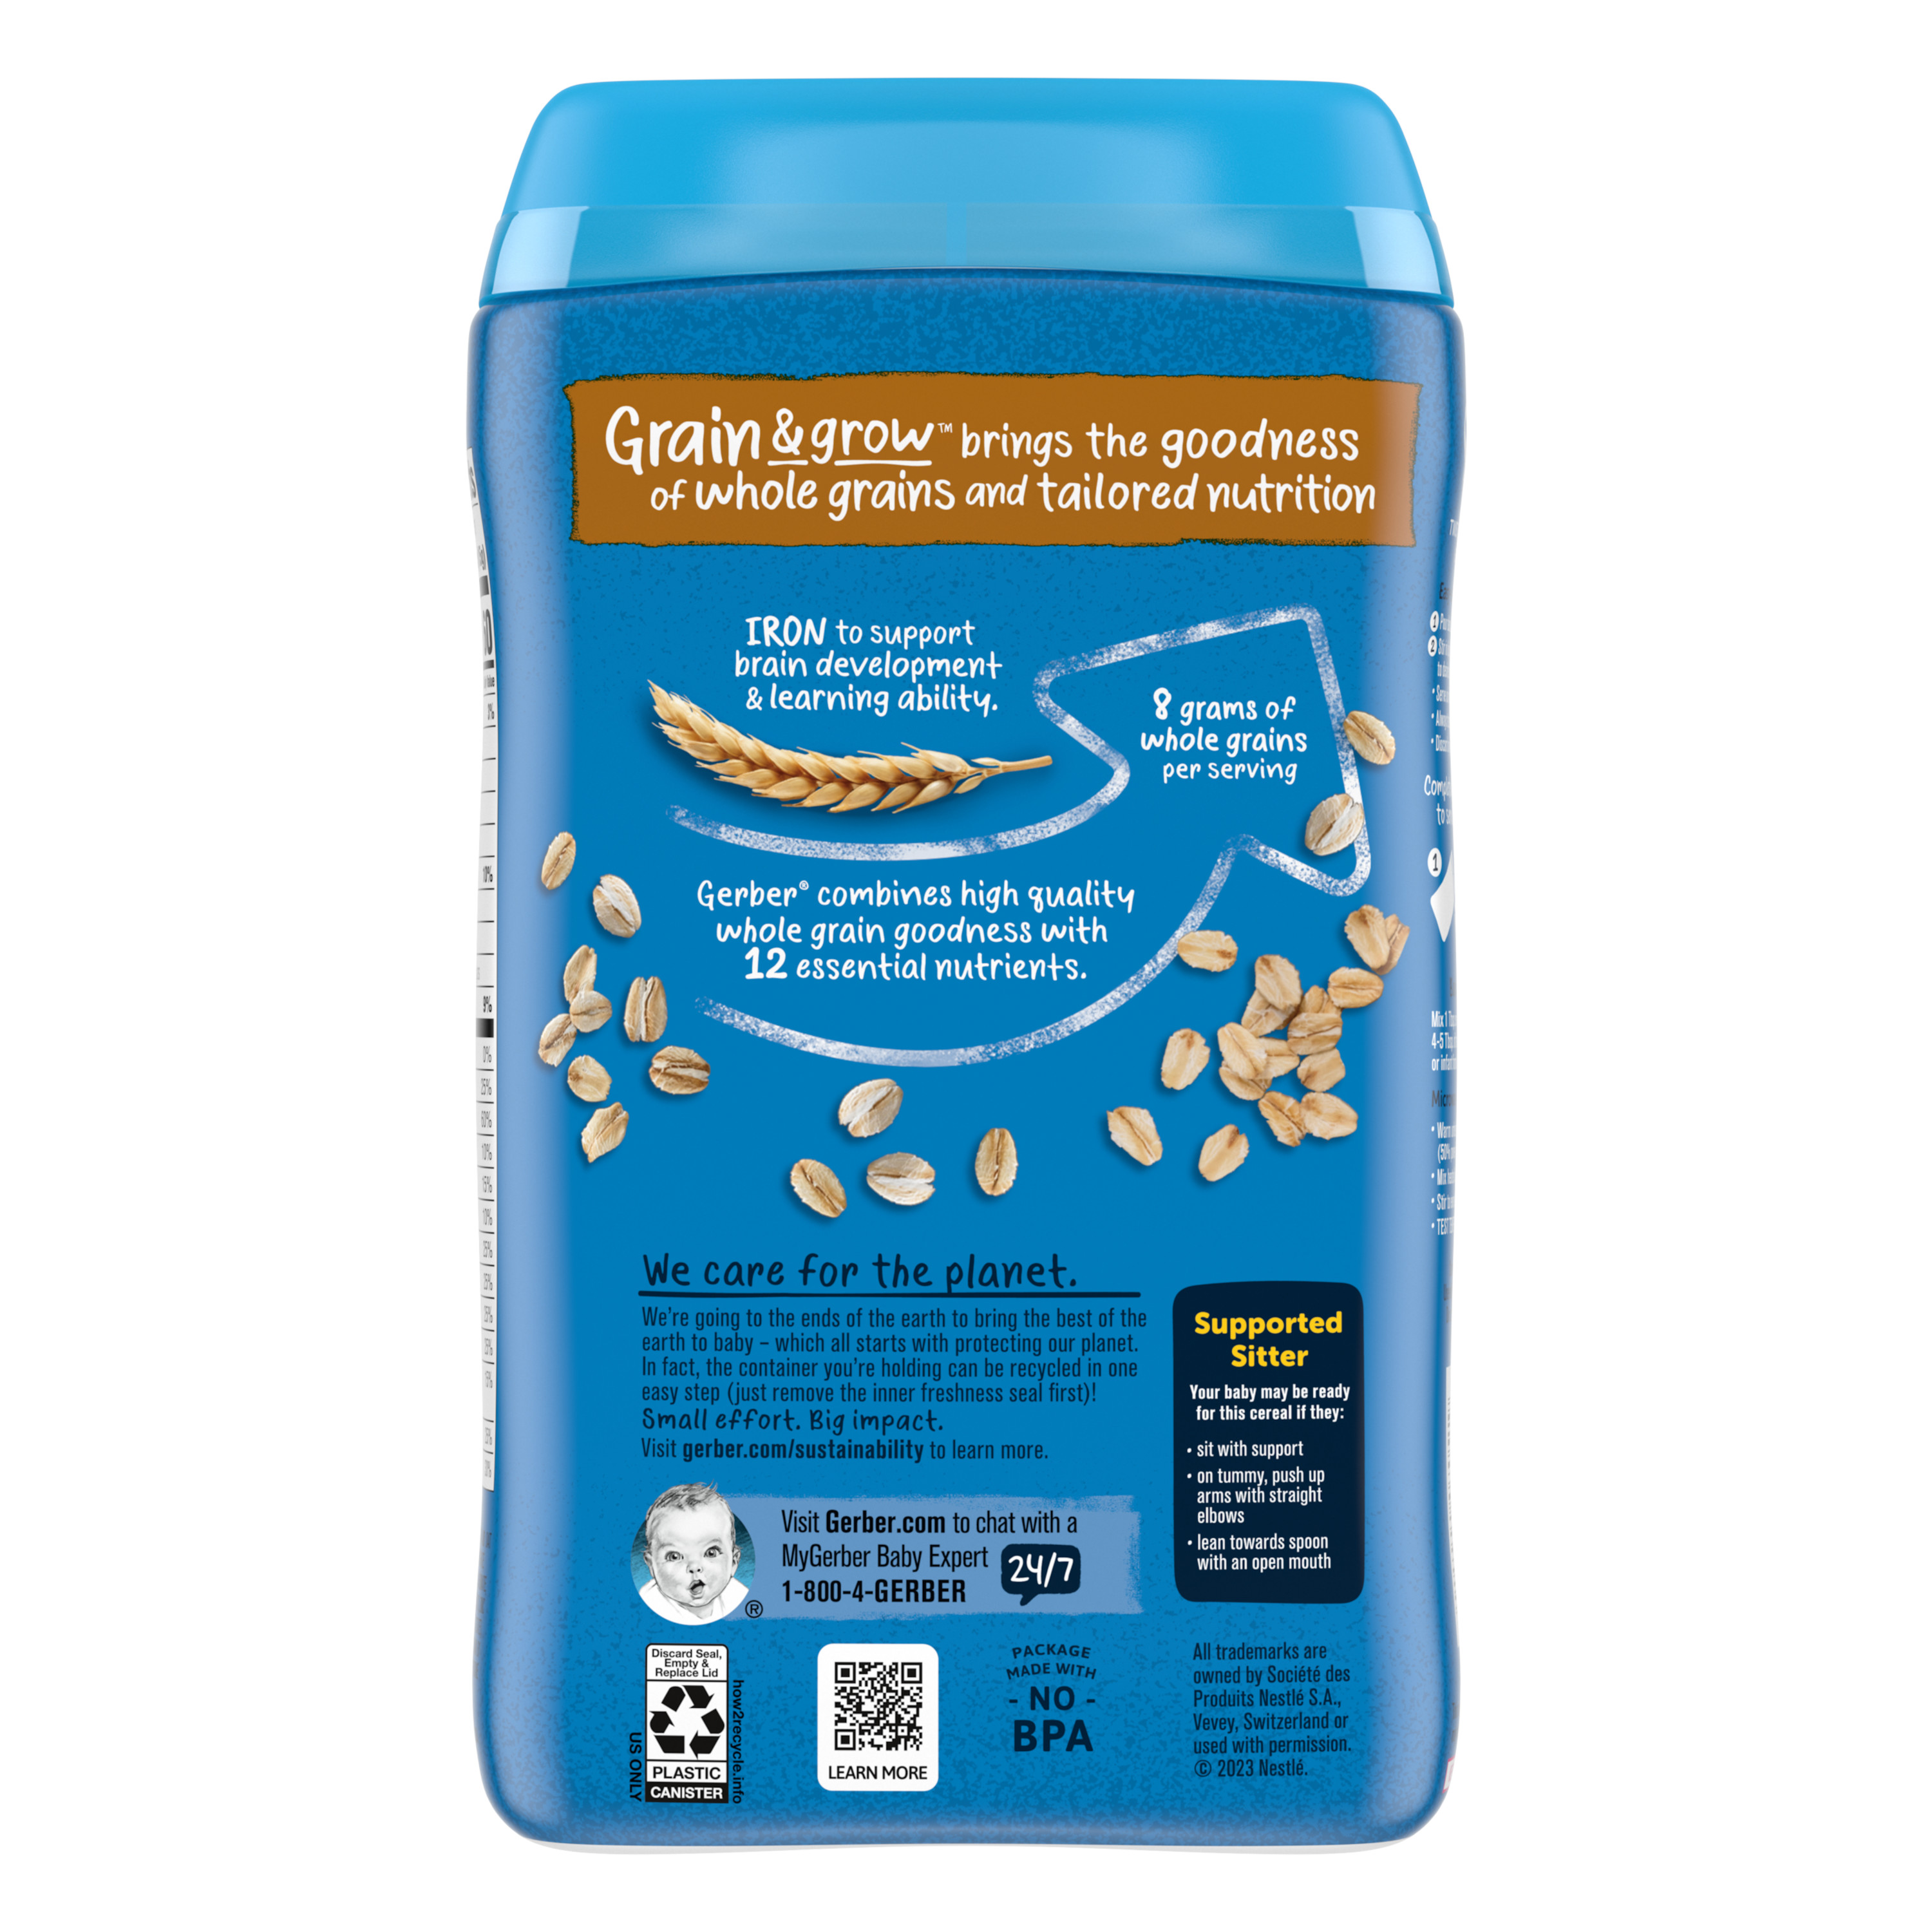 Gerber Baby Cereal 1st Foods, Supported Sitter, Grain & Grow, Oatmeal, Clean Label Project, 15 Oz - image 3 of 9